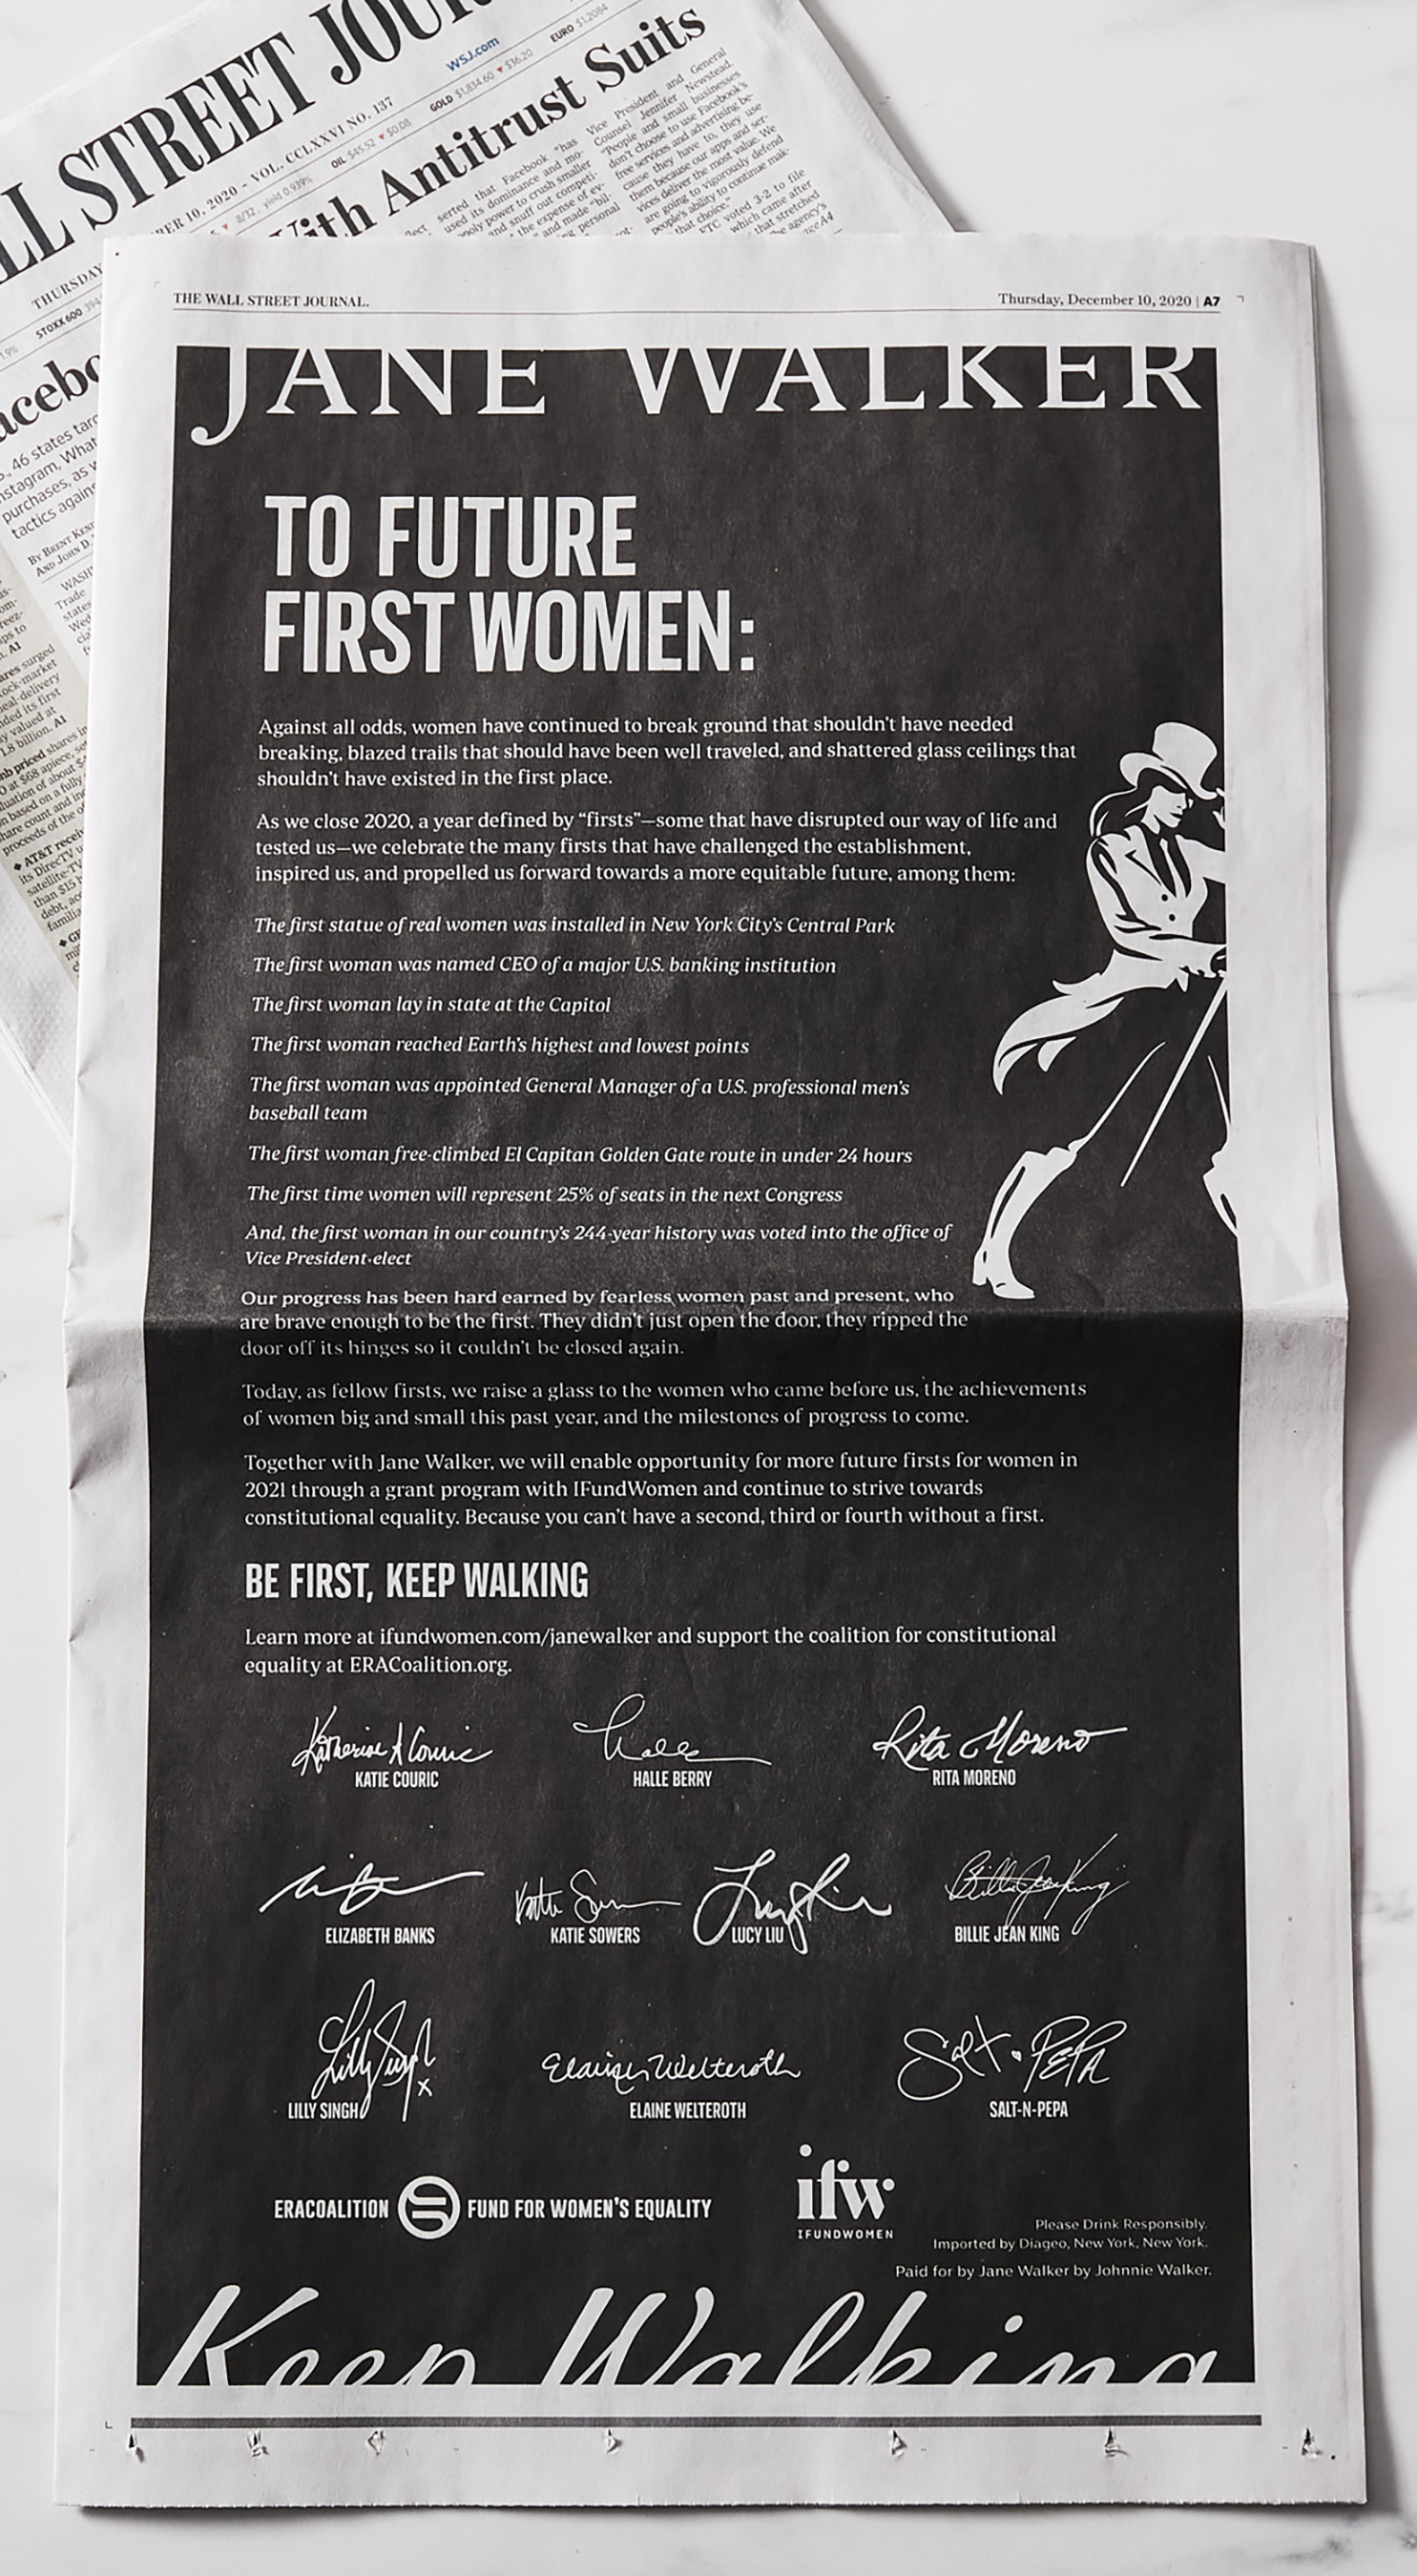 Jane Walker by Johnnie Walker launches its First Women campaign with an Open Letter in The New York Times, The Wall Street Journal and The Washington Post signed by a network of trailblazing 'First Women.'